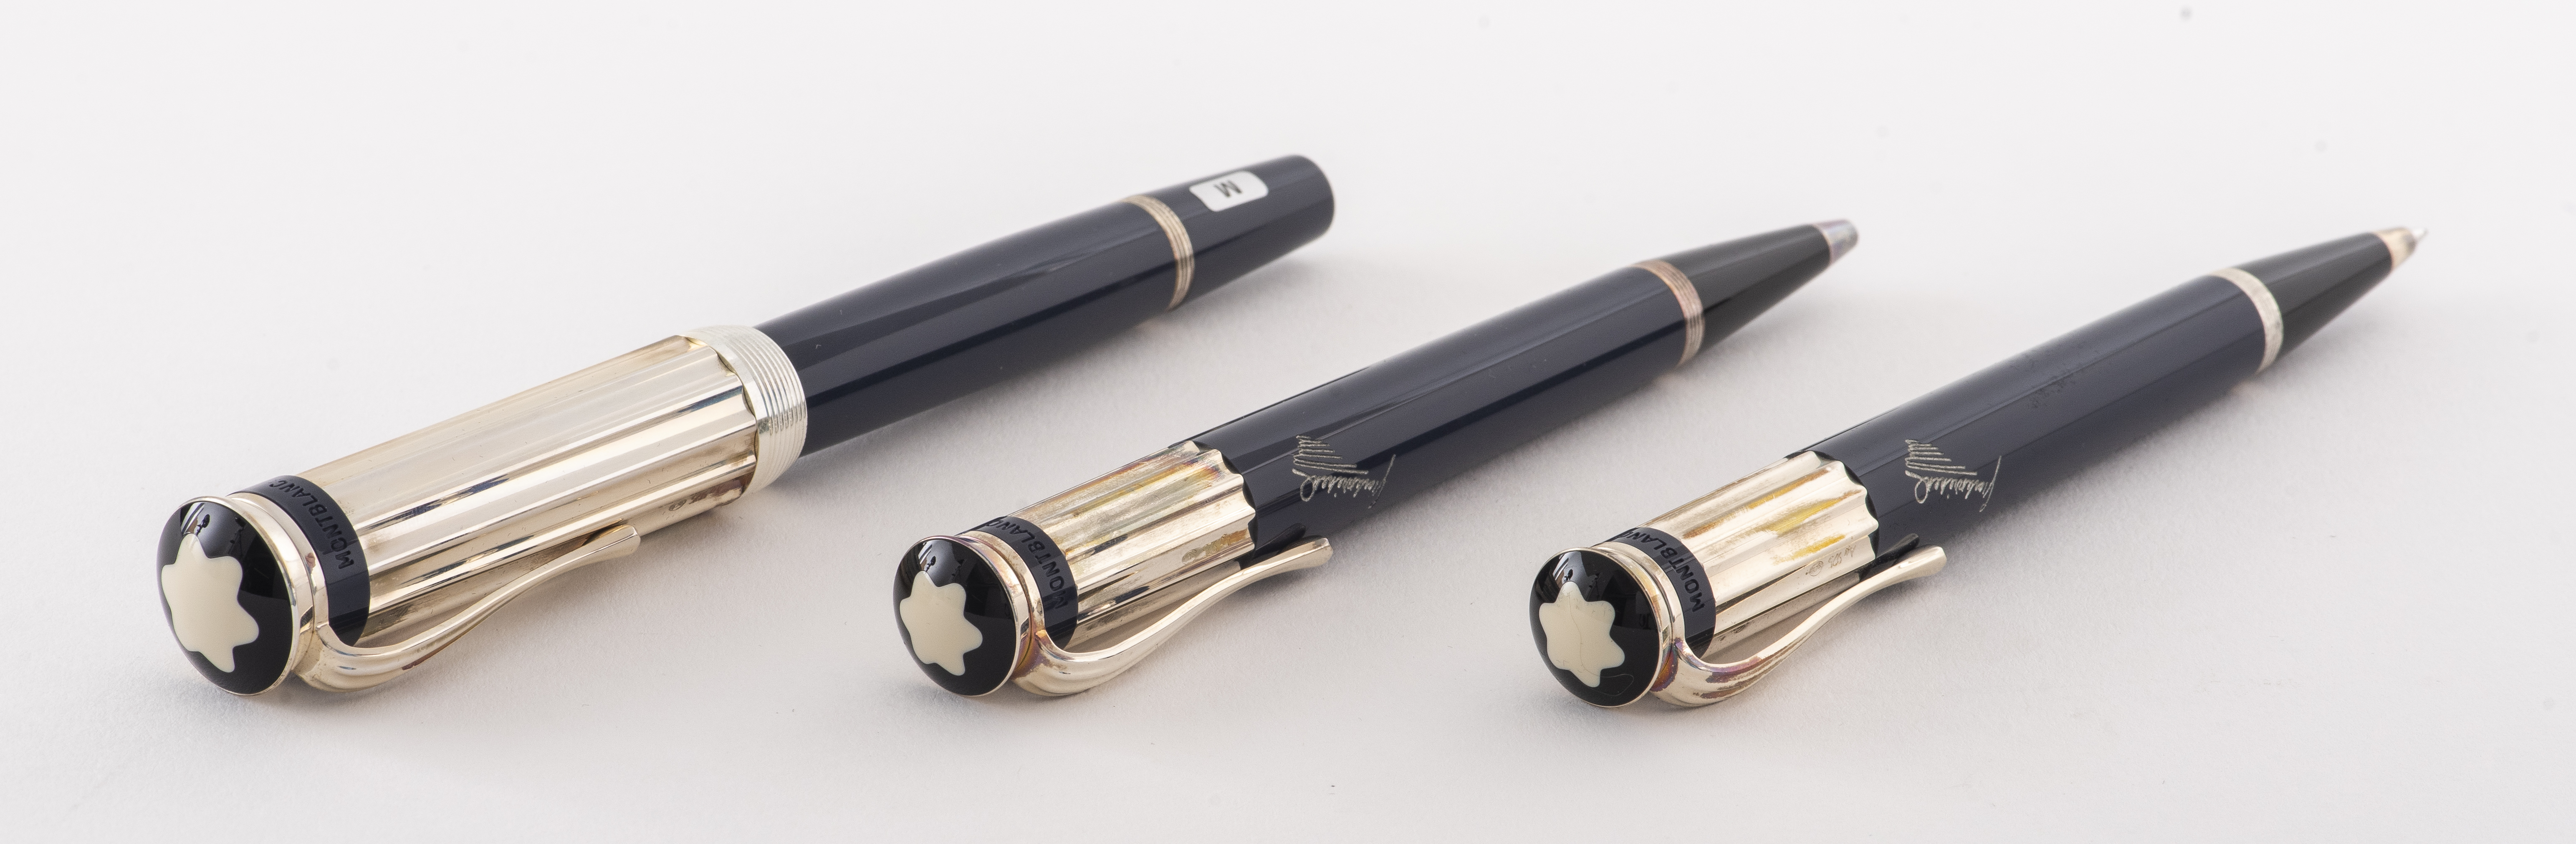 MONTBLANC 'CHARLES DICKENS' PEN